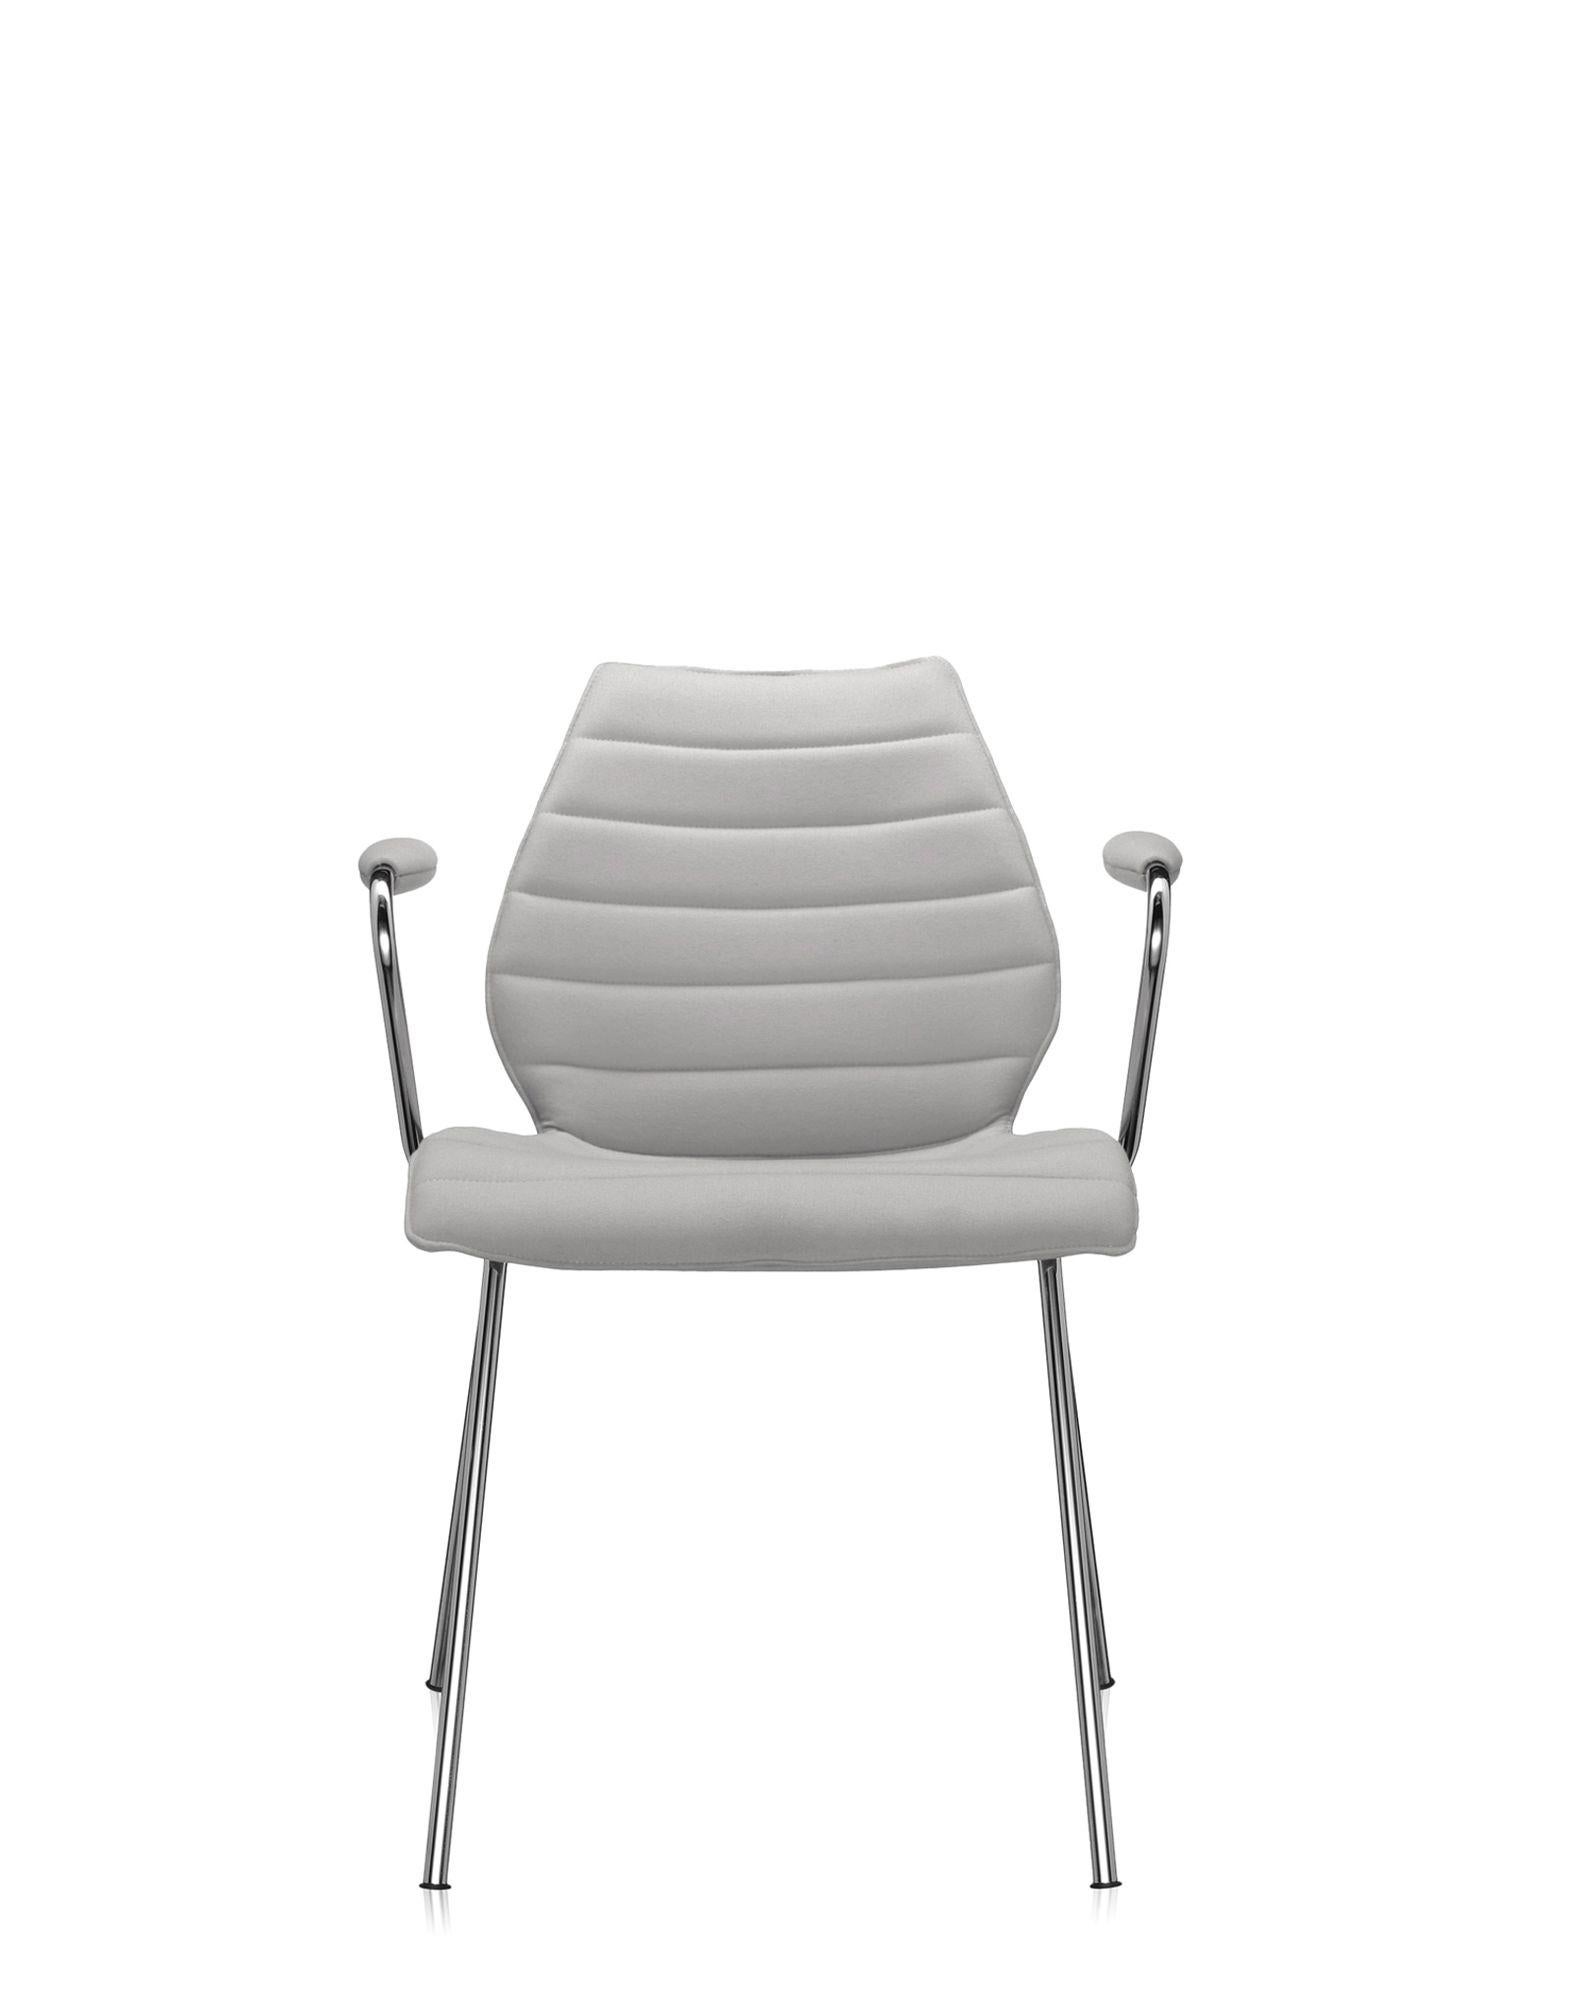 Modern Set of 2 Kartell Maui Soft Trevira Chair in Beige by Vico Magistretti For Sale